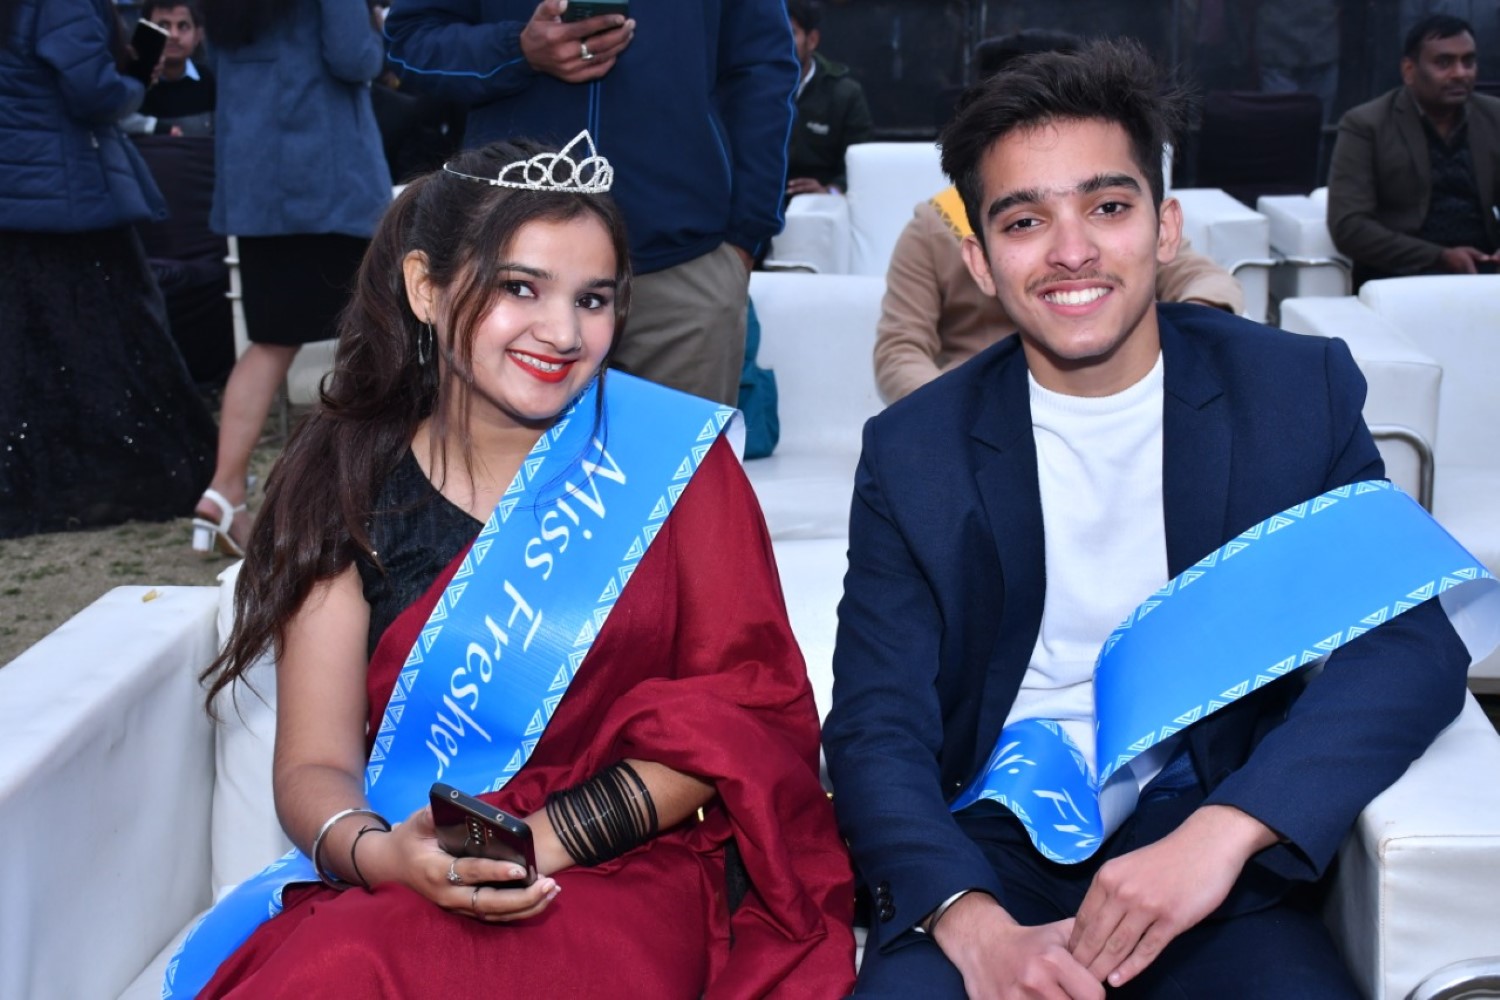 Freshers Party Celebrations at Accurate Business School